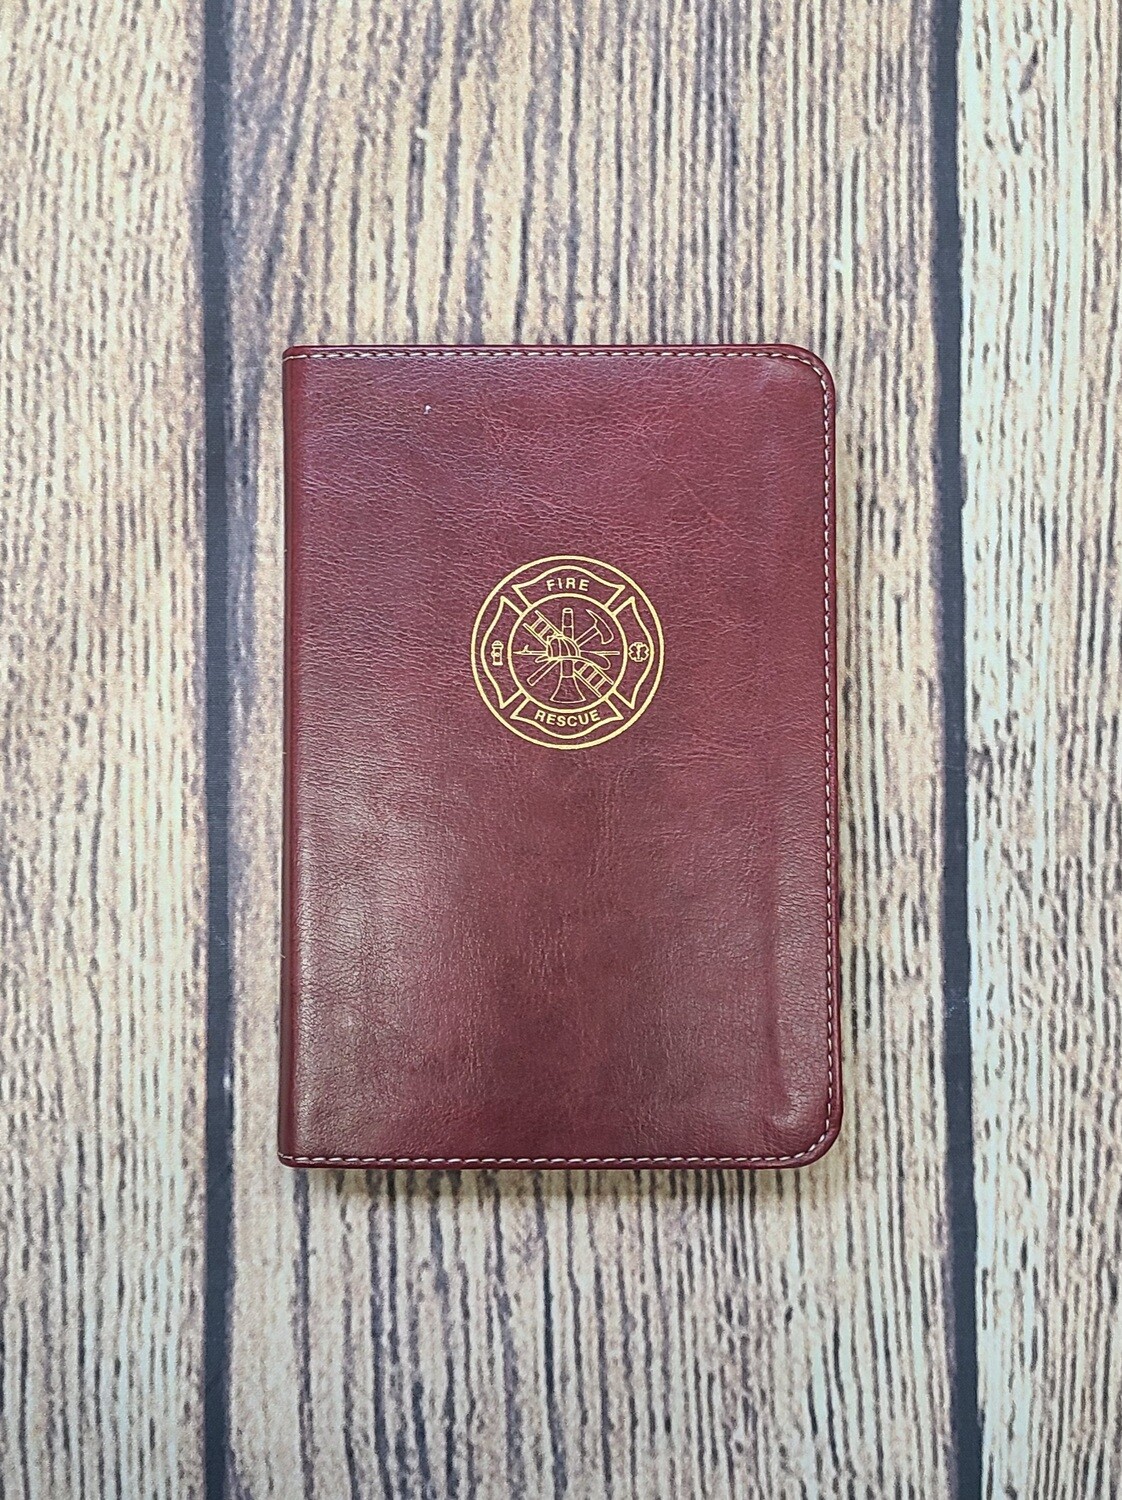 CSB Firefighter's Bible - Burgundy LeatherTouch